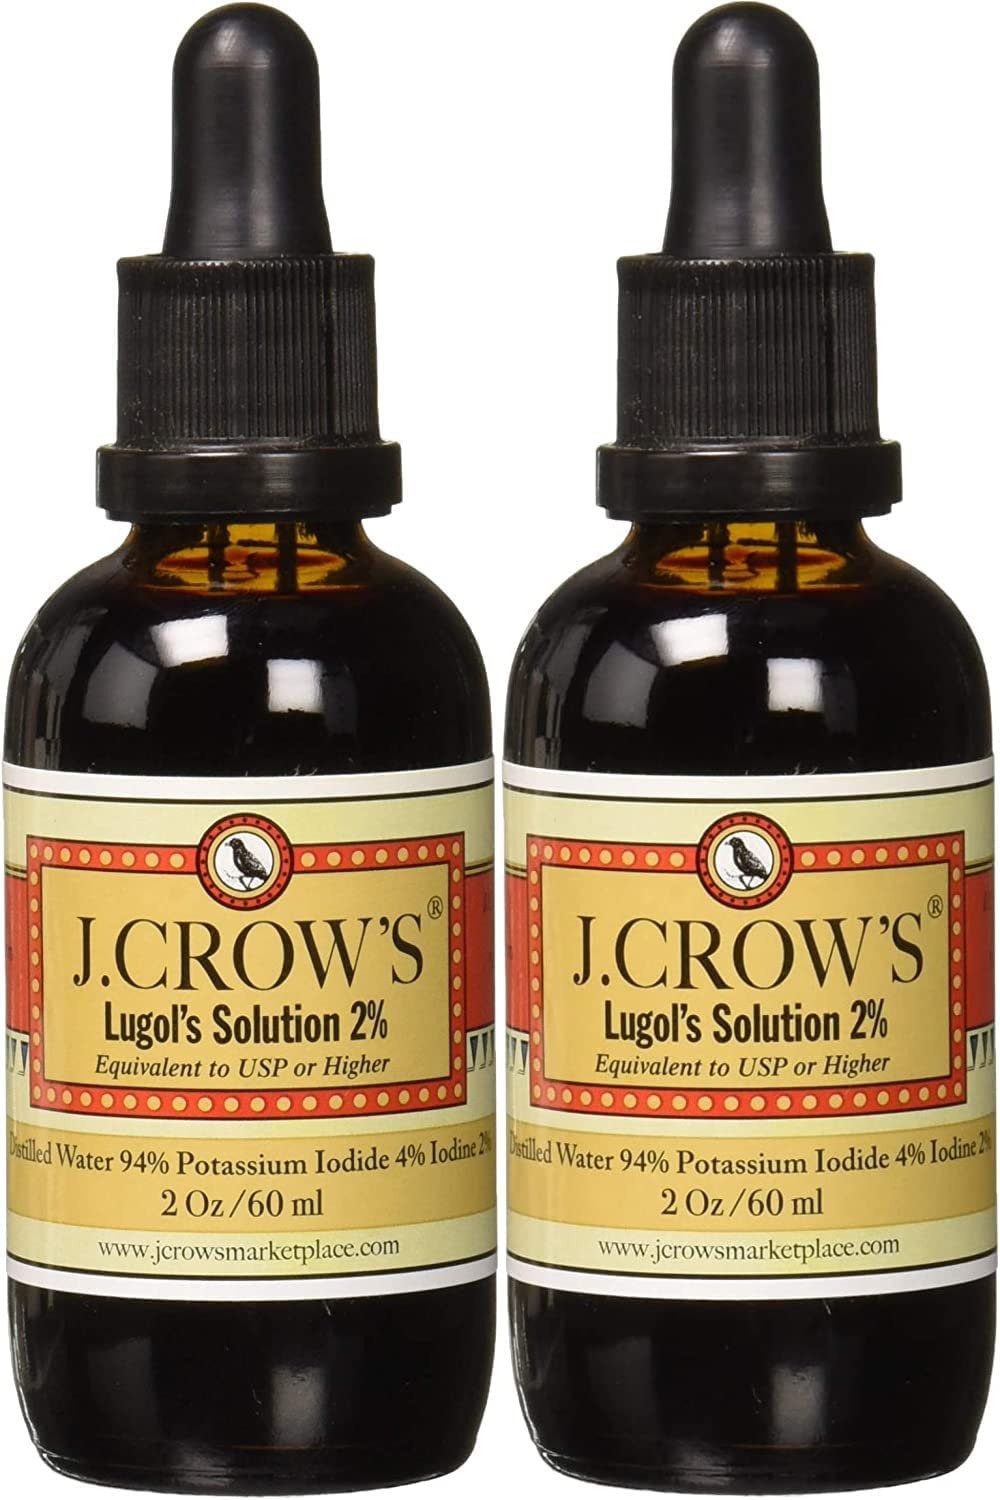 Lab J.Crow'sÂ® Lugol's Solution of Iodine 2% 2oz Twin Pack (2 Bottles)